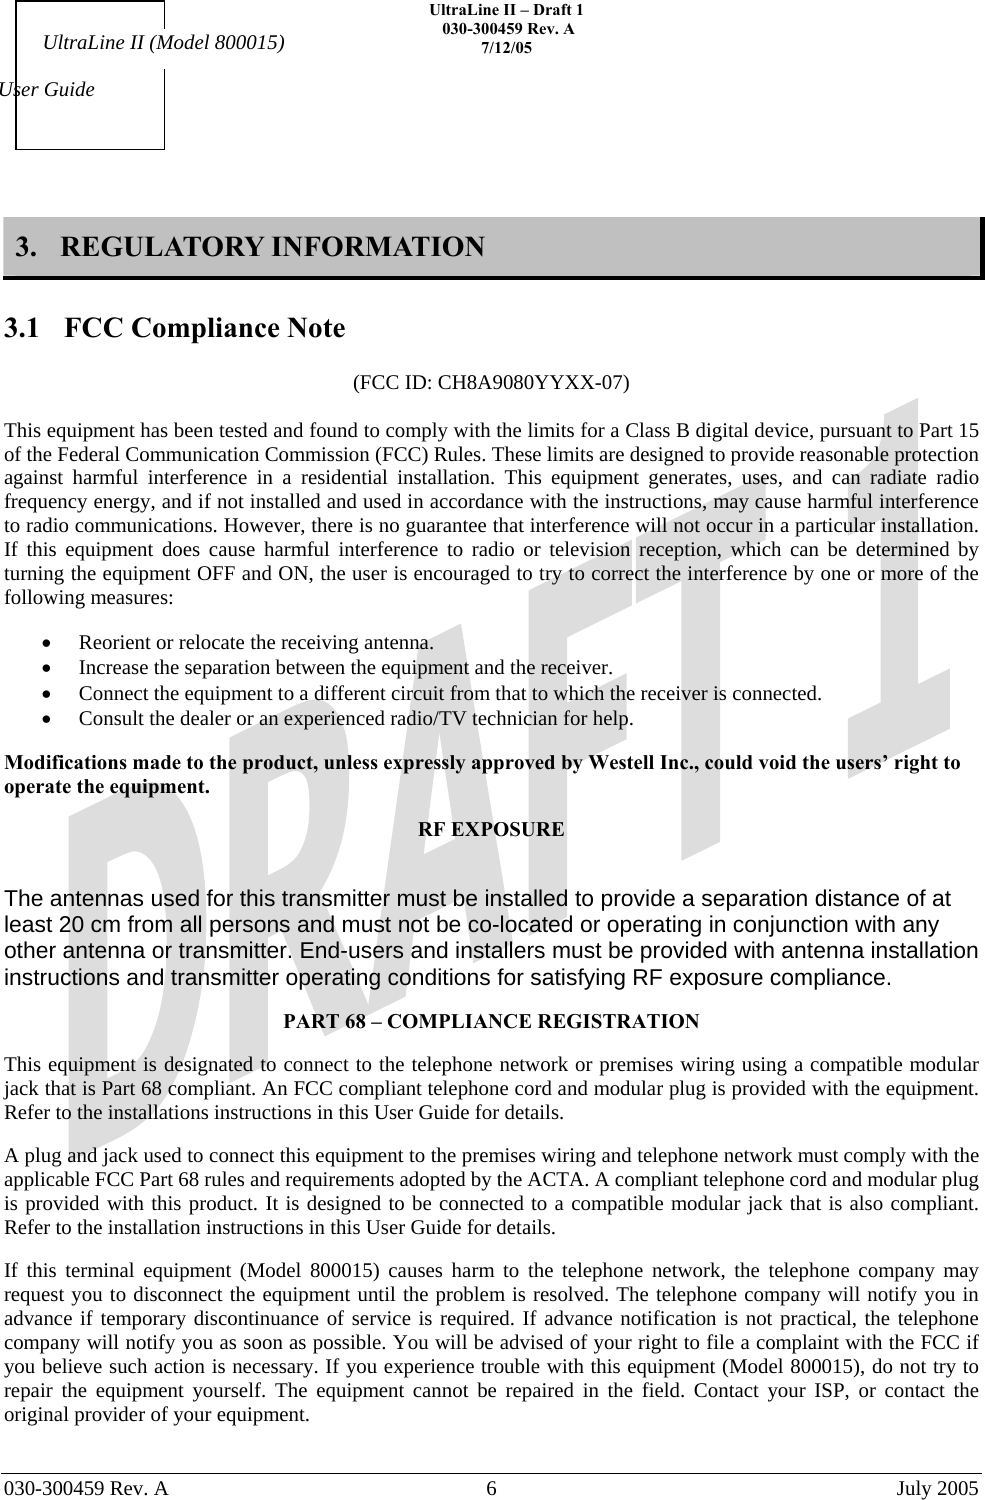    UltraLine II – Draft 1   030-300459 Rev. A 7/12/05     030-300459 Rev. A  6  July 2005    User Guide UltraLine II (Model 800015) 3. REGULATORY INFORMATION  3.1  FCC Compliance Note  (FCC ID: CH8A9080YYXX-07)  This equipment has been tested and found to comply with the limits for a Class B digital device, pursuant to Part 15 of the Federal Communication Commission (FCC) Rules. These limits are designed to provide reasonable protection against harmful interference in a residential installation. This equipment generates, uses, and can radiate radio frequency energy, and if not installed and used in accordance with the instructions, may cause harmful interference to radio communications. However, there is no guarantee that interference will not occur in a particular installation. If this equipment does cause harmful interference to radio or television reception, which can be determined by turning the equipment OFF and ON, the user is encouraged to try to correct the interference by one or more of the following measures:  •  Reorient or relocate the receiving antenna. •  Increase the separation between the equipment and the receiver. •  Connect the equipment to a different circuit from that to which the receiver is connected. •  Consult the dealer or an experienced radio/TV technician for help.  Modifications made to the product, unless expressly approved by Westell Inc., could void the users’ right to operate the equipment.  RF EXPOSURE  The antennas used for this transmitter must be installed to provide a separation distance of at least 20 cm from all persons and must not be co-located or operating in conjunction with any other antenna or transmitter. End-users and installers must be provided with antenna installation instructions and transmitter operating conditions for satisfying RF exposure compliance.  PART 68 – COMPLIANCE REGISTRATION  This equipment is designated to connect to the telephone network or premises wiring using a compatible modular jack that is Part 68 compliant. An FCC compliant telephone cord and modular plug is provided with the equipment. Refer to the installations instructions in this User Guide for details.   A plug and jack used to connect this equipment to the premises wiring and telephone network must comply with the applicable FCC Part 68 rules and requirements adopted by the ACTA. A compliant telephone cord and modular plug is provided with this product. It is designed to be connected to a compatible modular jack that is also compliant. Refer to the installation instructions in this User Guide for details.  If this terminal equipment (Model 800015) causes harm to the telephone network, the telephone company may request you to disconnect the equipment until the problem is resolved. The telephone company will notify you in advance if temporary discontinuance of service is required. If advance notification is not practical, the telephone company will notify you as soon as possible. You will be advised of your right to file a complaint with the FCC if you believe such action is necessary. If you experience trouble with this equipment (Model 800015), do not try to repair the equipment yourself. The equipment cannot be repaired in the field. Contact your ISP, or contact the original provider of your equipment.   